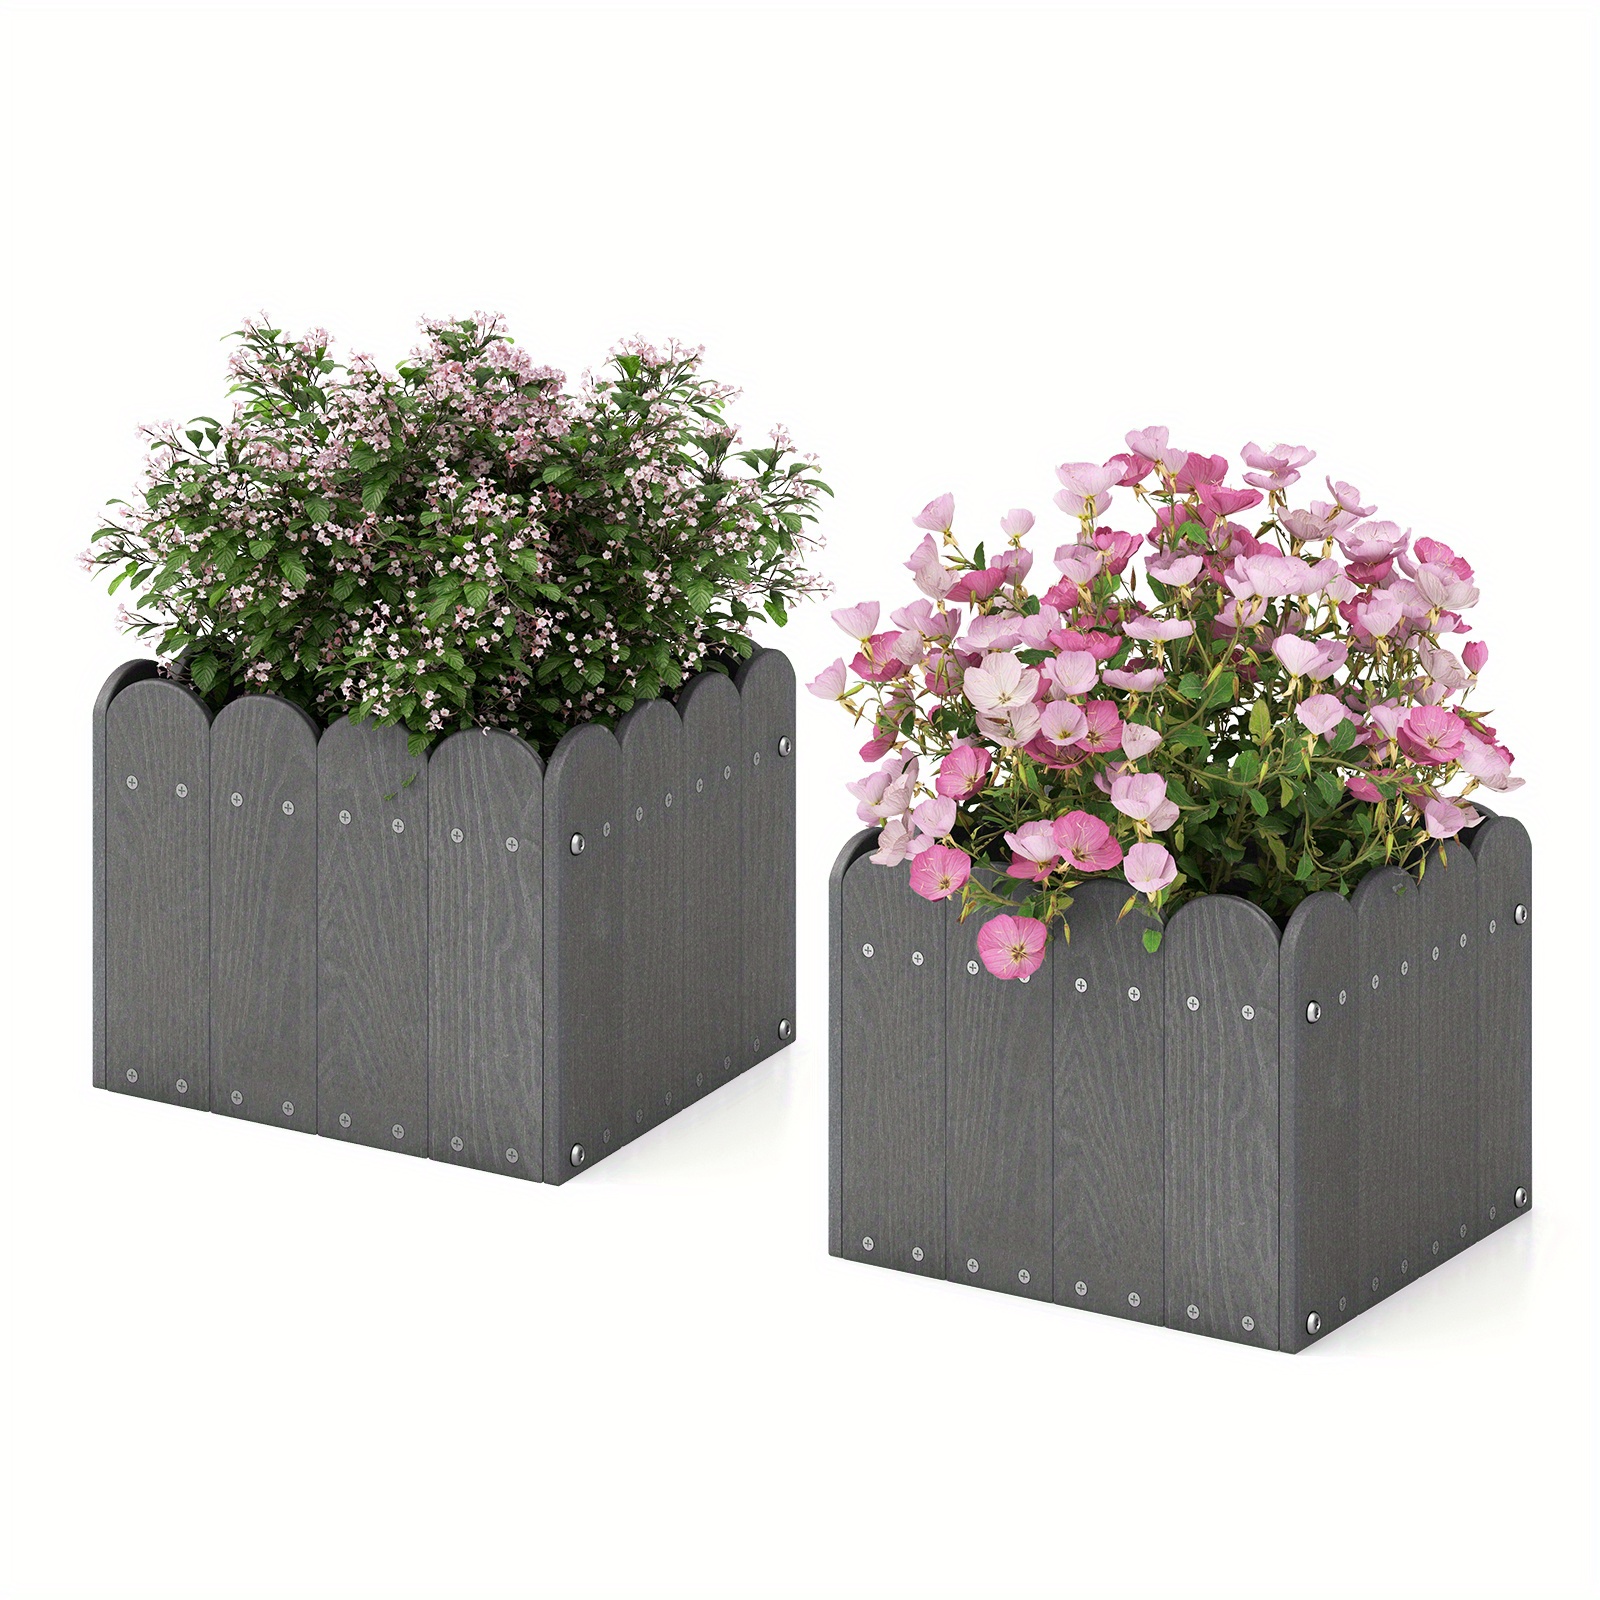 

Costway 2 Pack Square Planter Box Weather-resistant Hdpe Flower Pot Garden Bed Grey